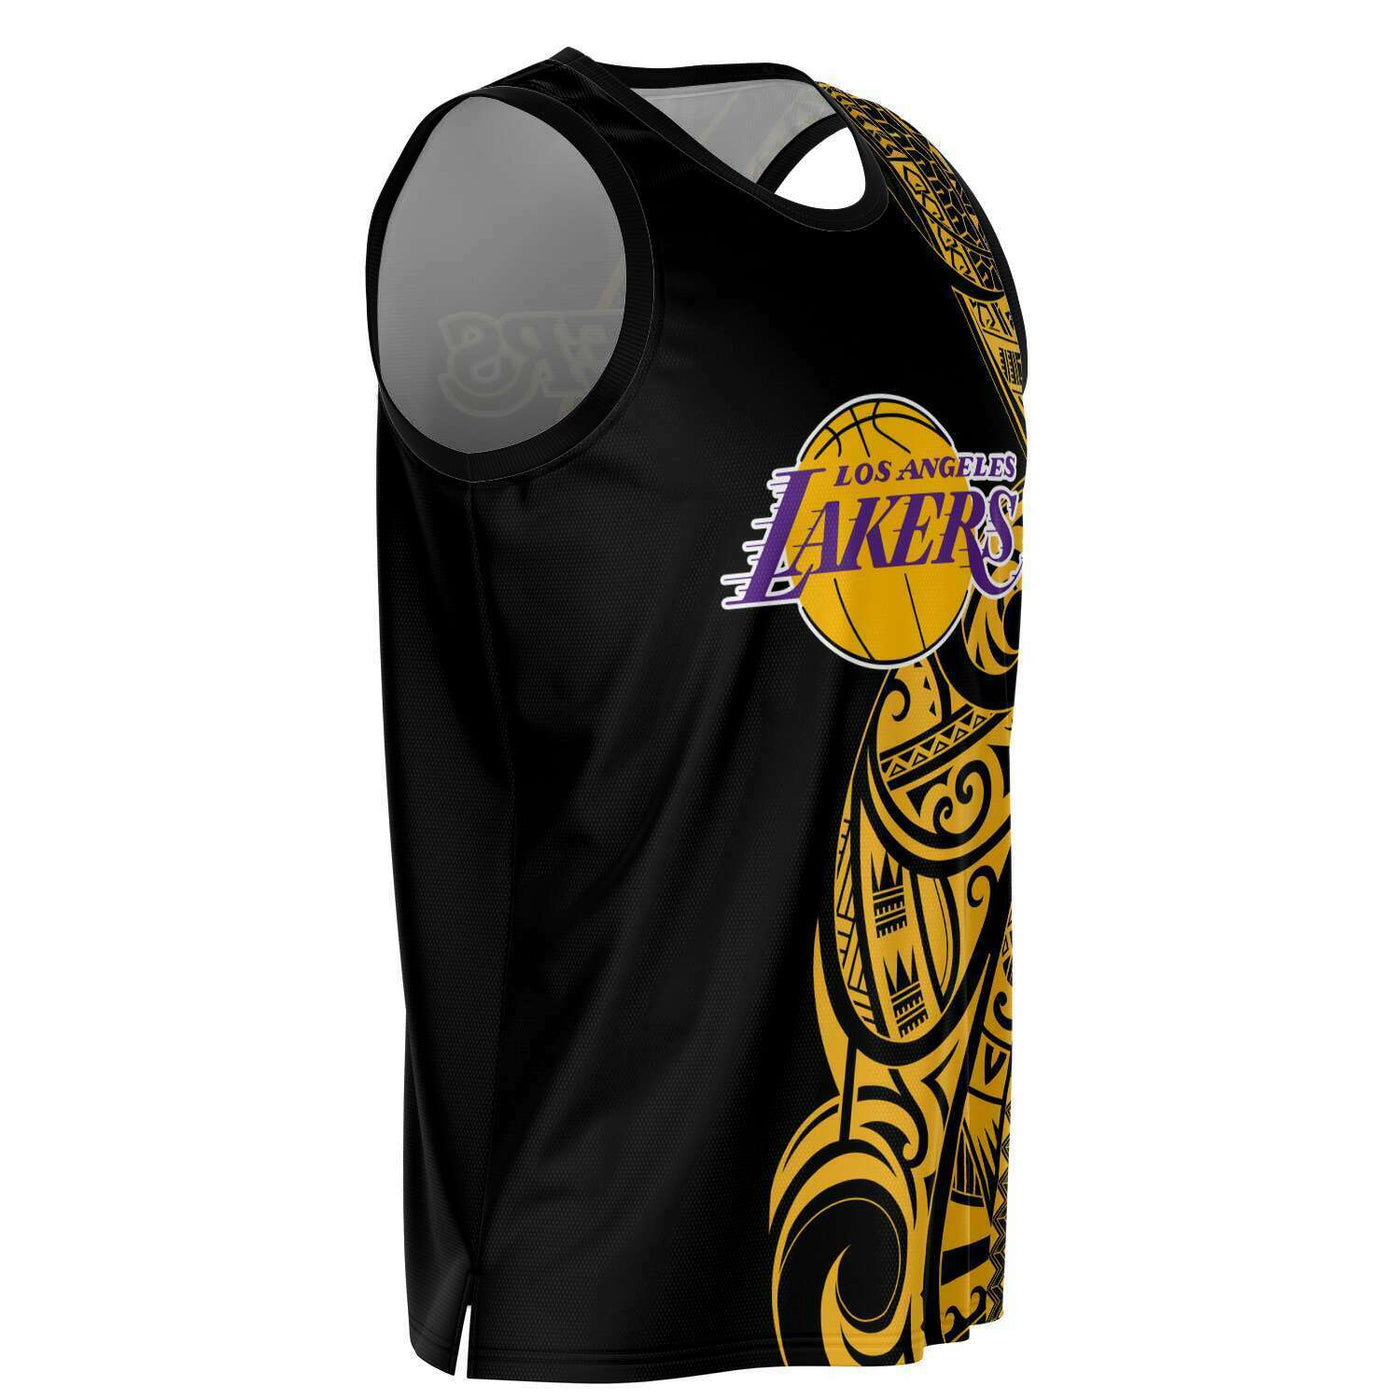 The Acclaimed - Platinum Basketball Jersey